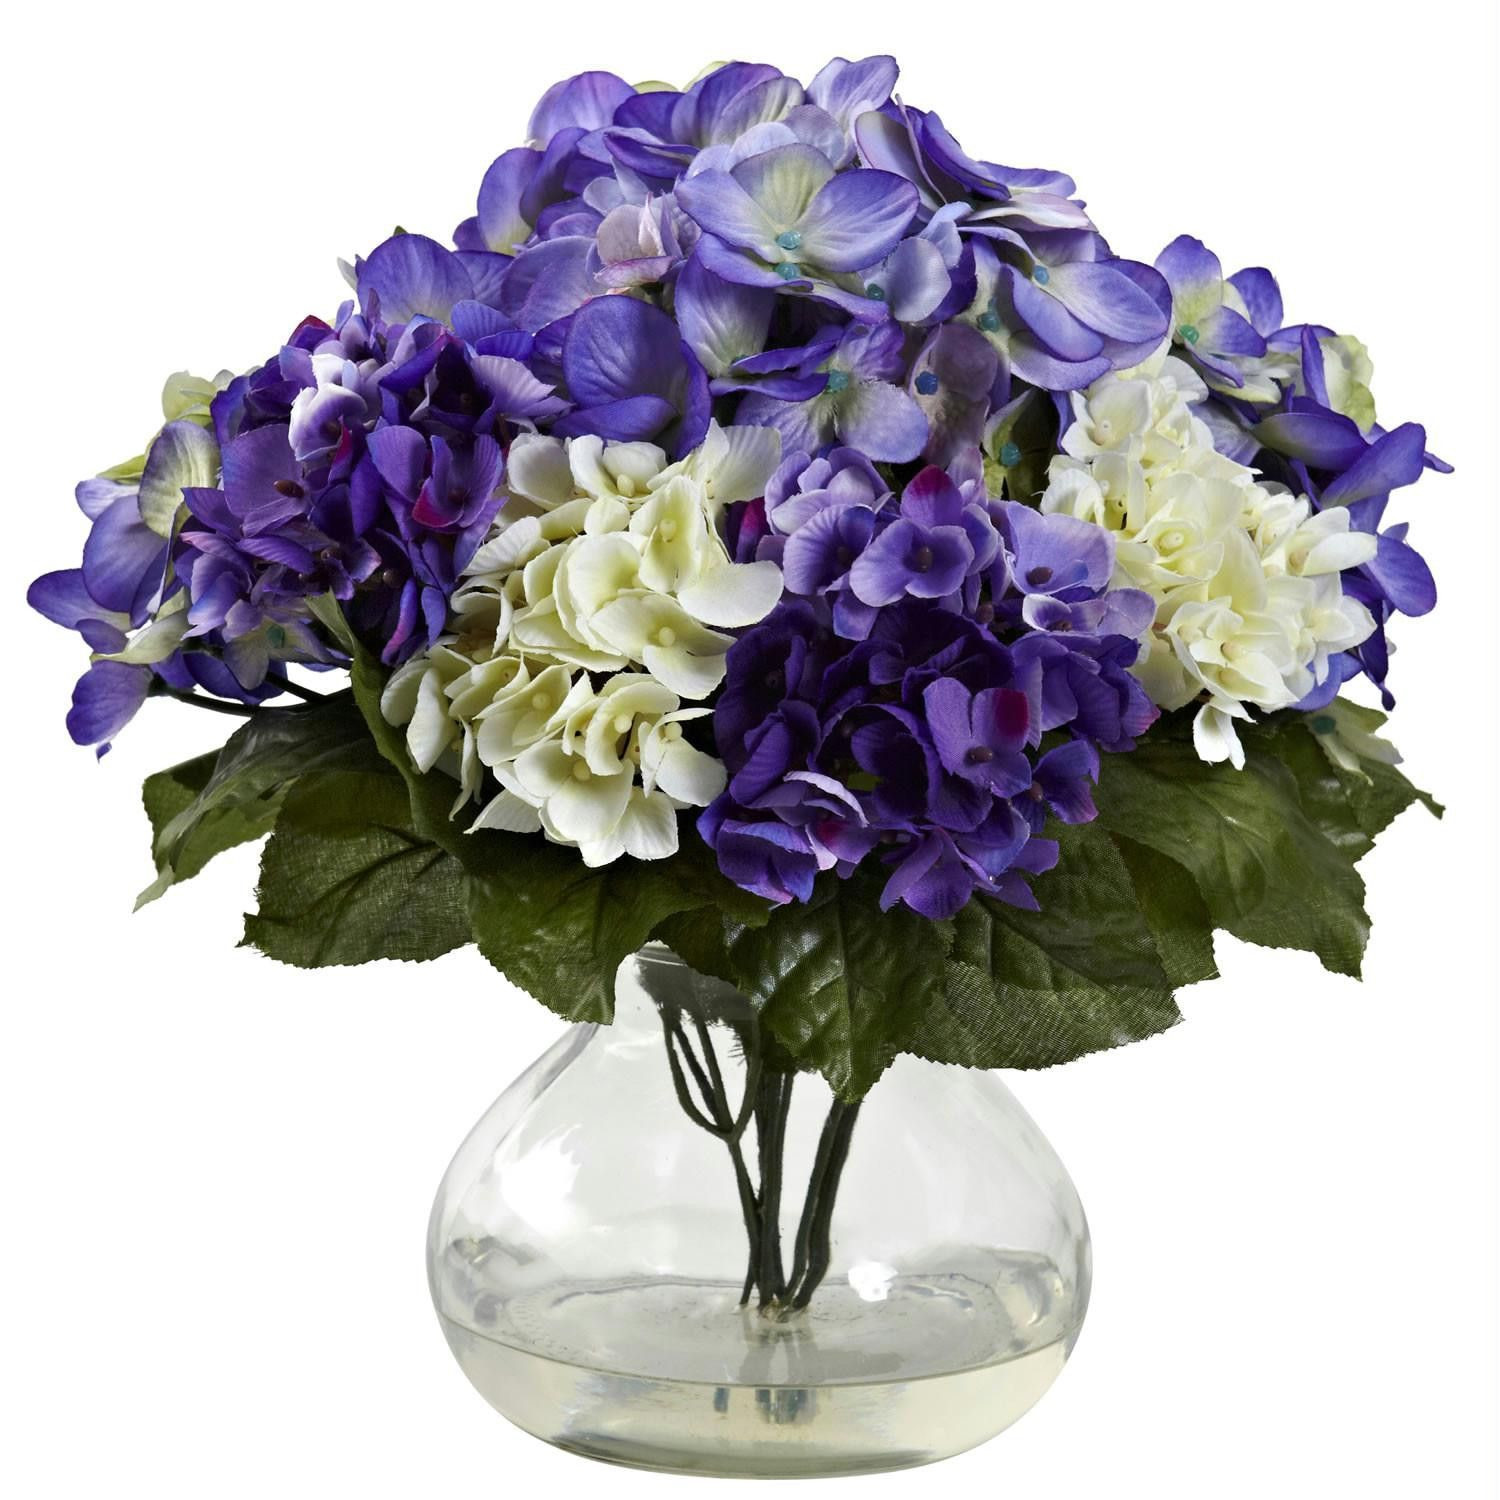 30 Cute Lenox Single Flower Vase 2024 free download lenox single flower vase of mixed hydrangea w vase products pinterest hydrangea and products for the mixed silk hydrangea flowers with rosie posie vase will make a warm and welcoming additio